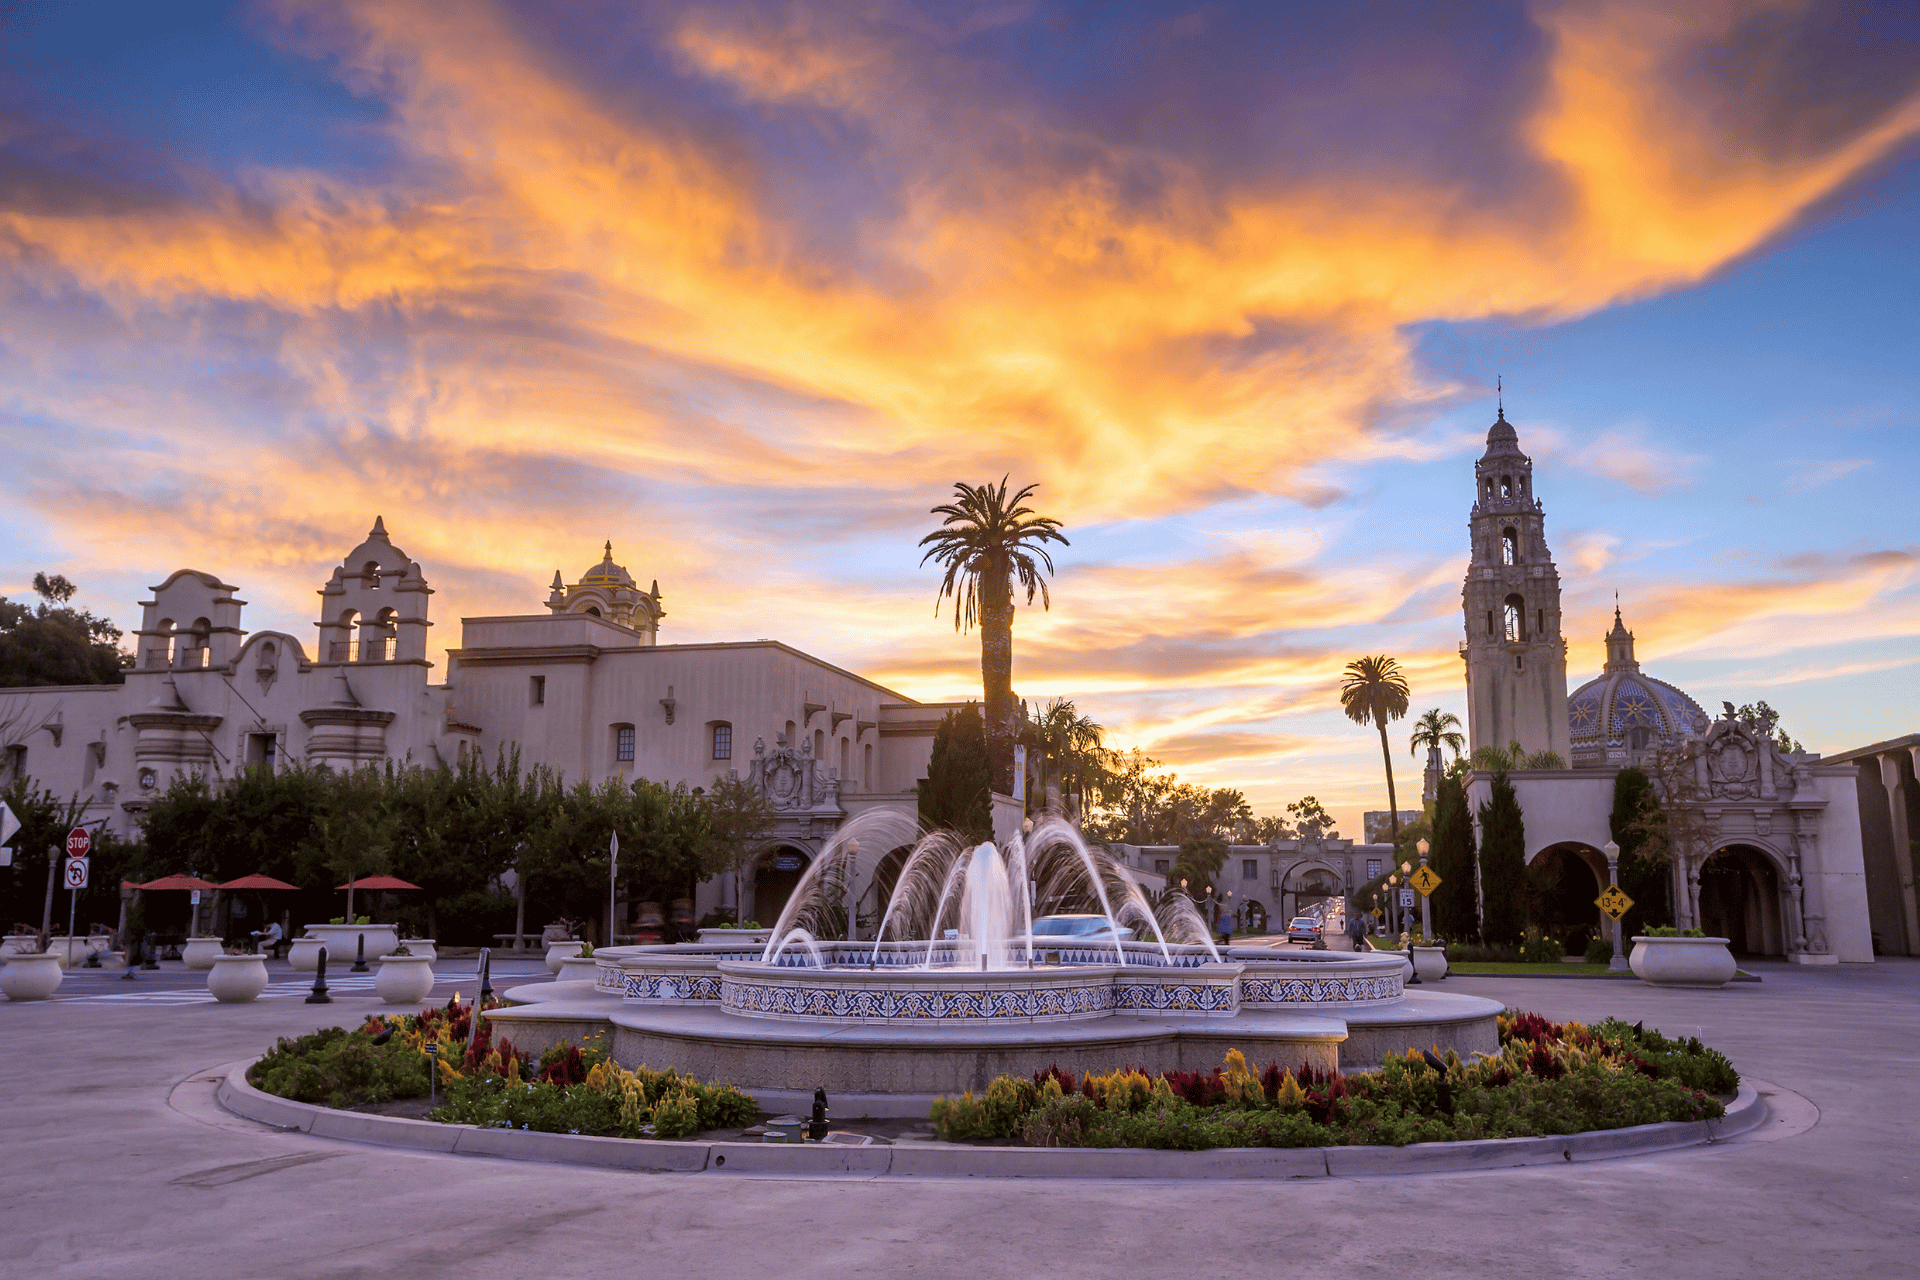 San Diego's Balboa Park in San Diego California by f11photo from Getty Images